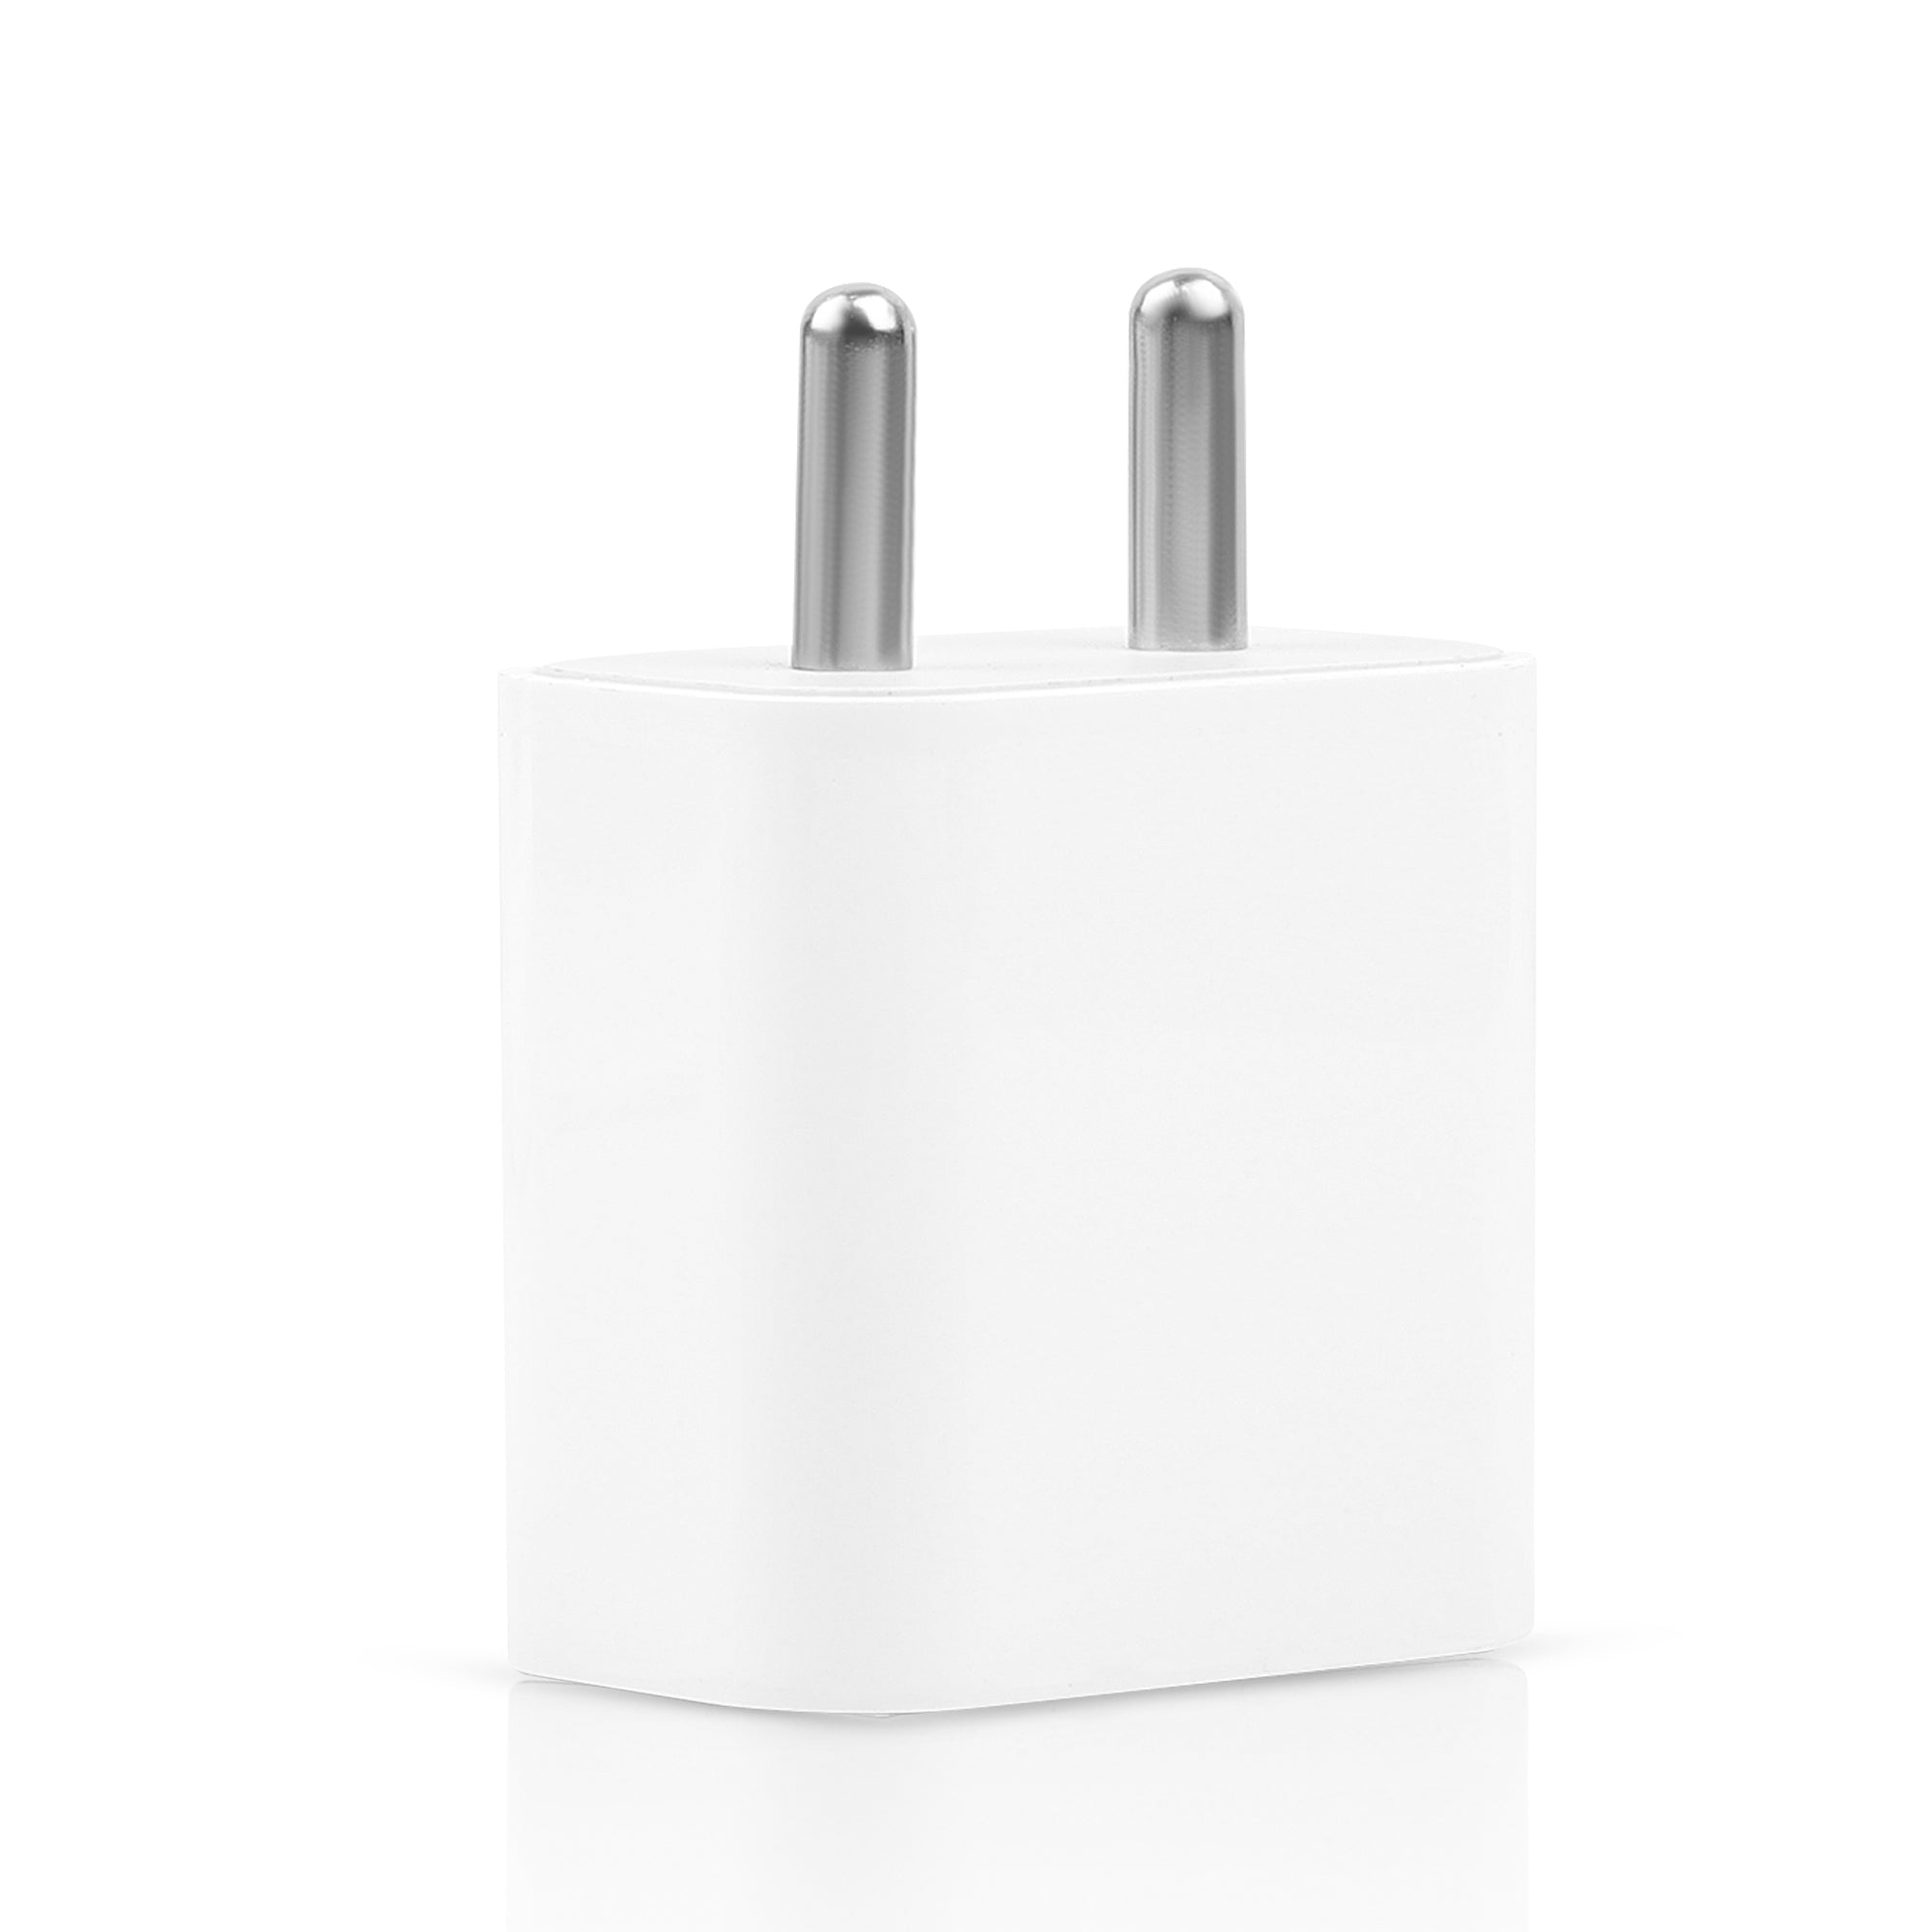 AMAZE PLUS PD MOBILE CHARGER  (20W/4AMPS) POWER ADAPTER (WHITE)